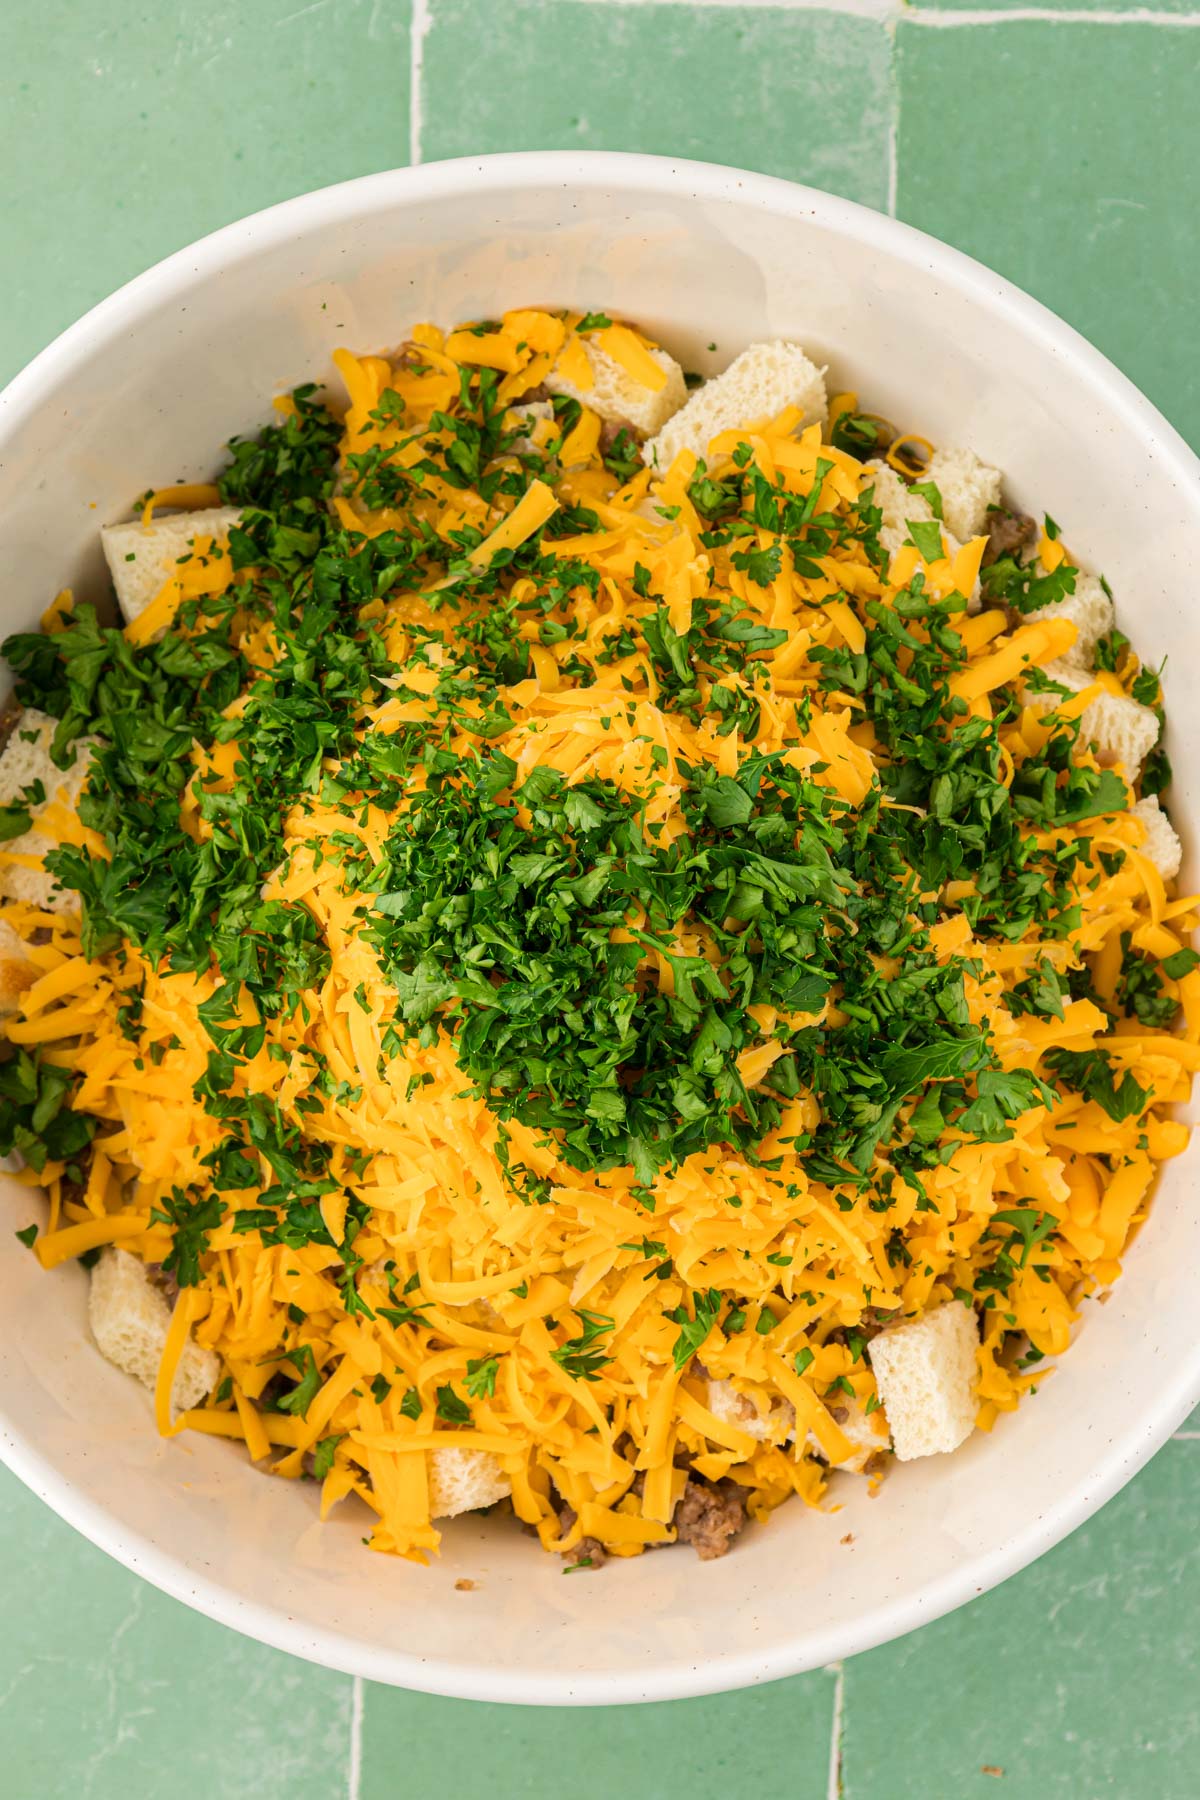 Parsley, cheese, bread, sausage, onions, and spices being mixed together to make a strata mixture.